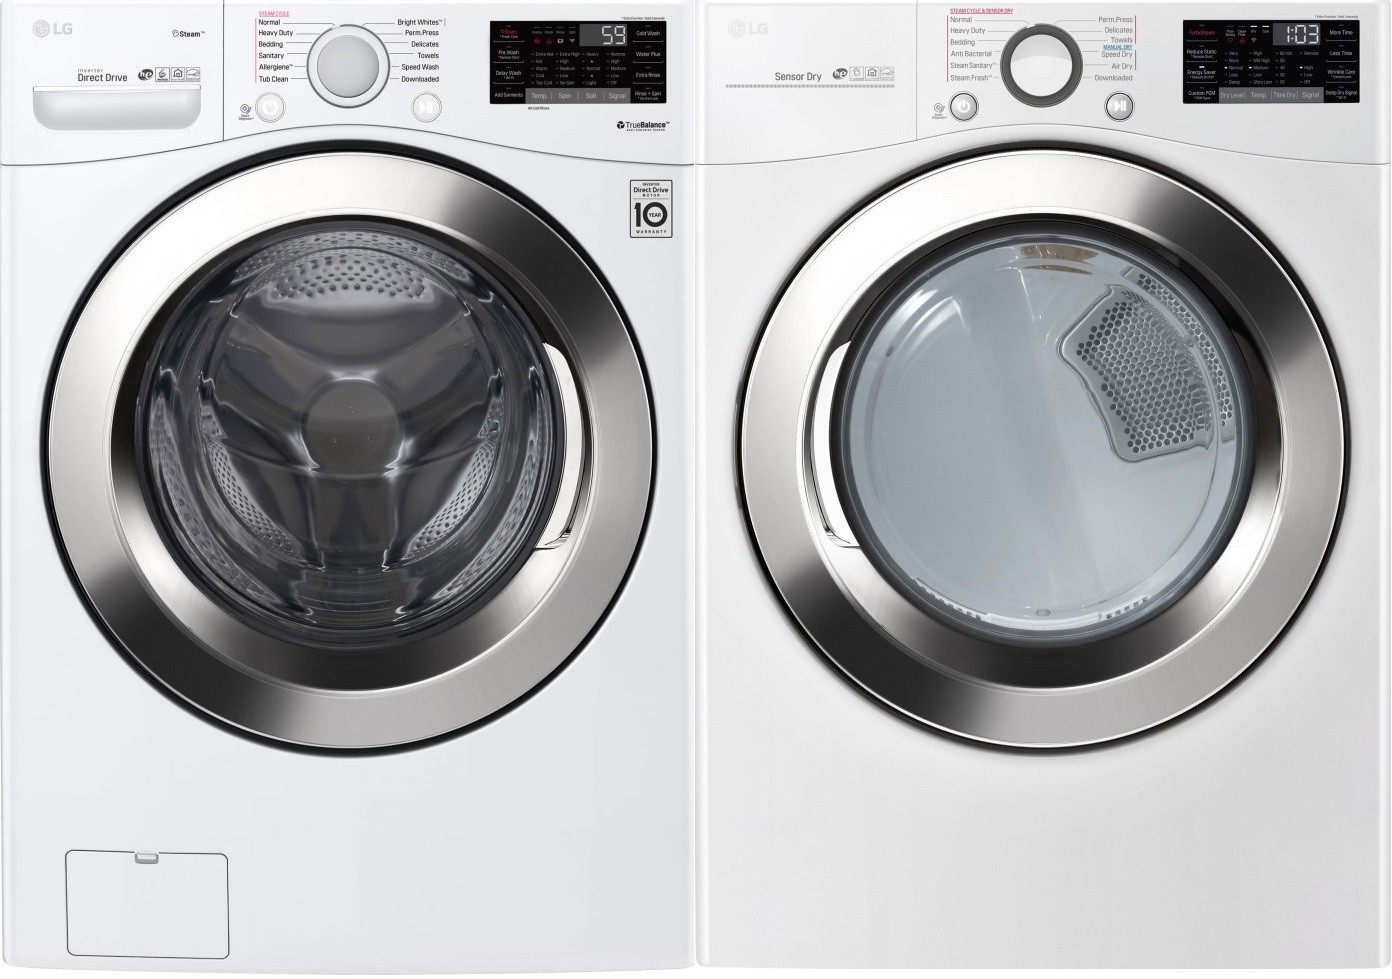 Lg Lgwadrew37001 Side By Side Washer Dryer Set With Front Load Washer And Electric Dryer In White